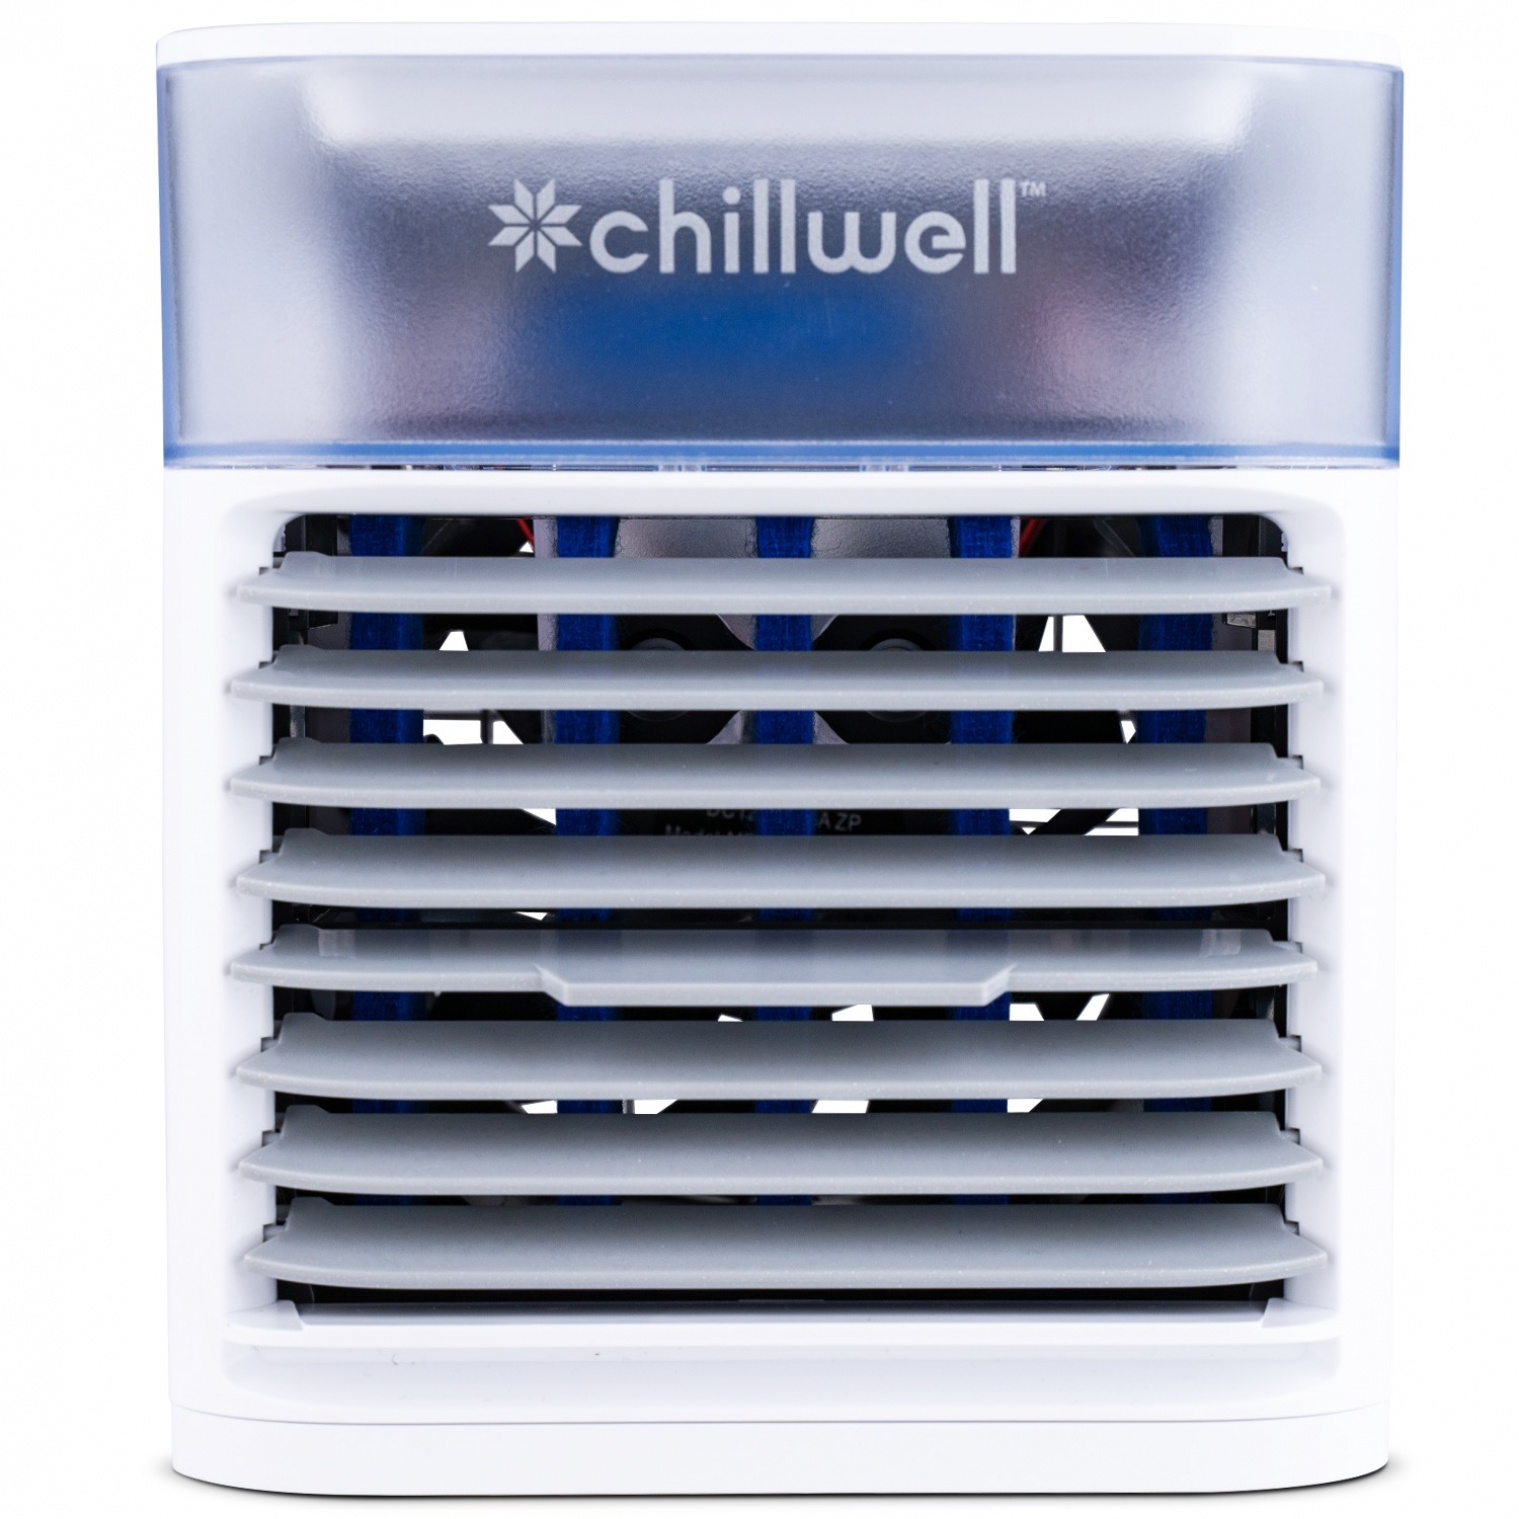 Chillwell AC As Seen On Tv Price